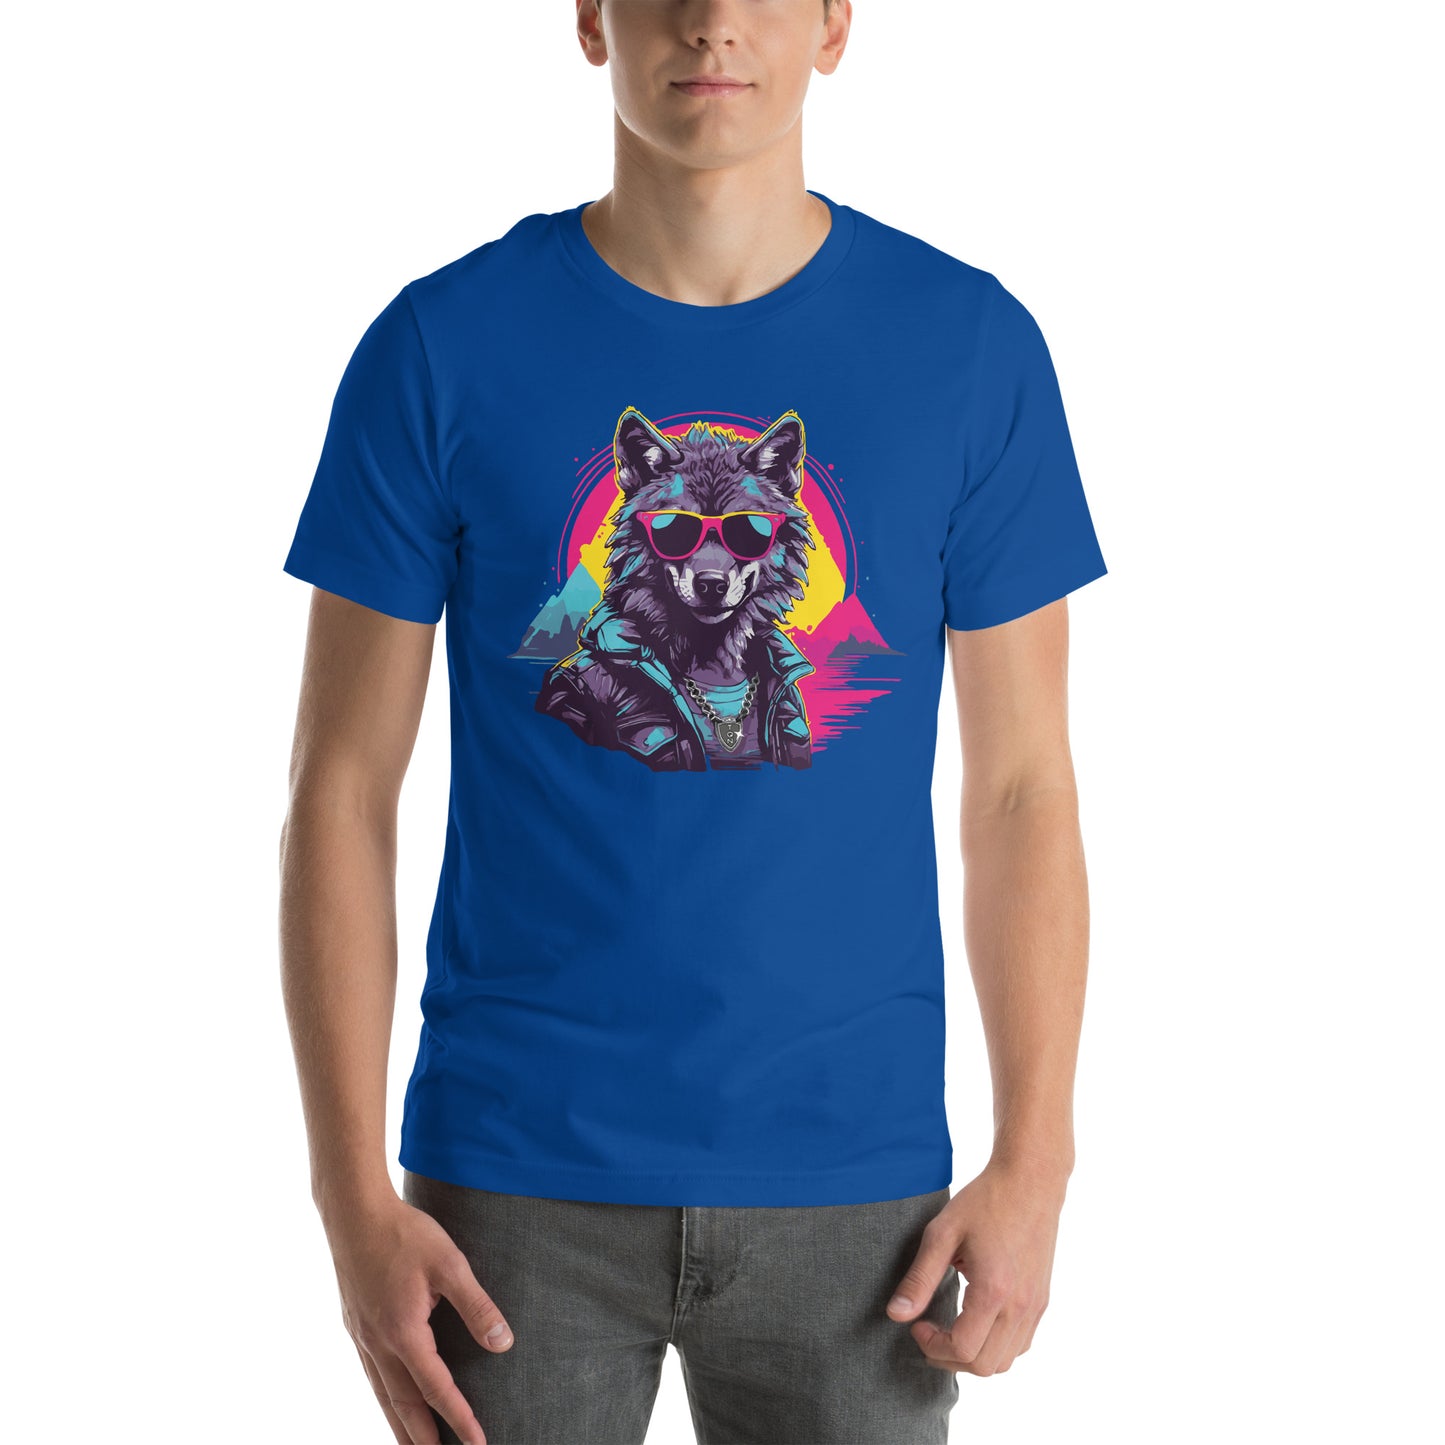 Royal blue T-shirt featuring a funny, pimp-styled wolf wearing sunglasses and a shiny silver chain from the HA HA LAND collection. The HOWLIN' HIPSTER design showcases a hipster wolf with cool accessories, perfect for a unique and humorous fashion statement.